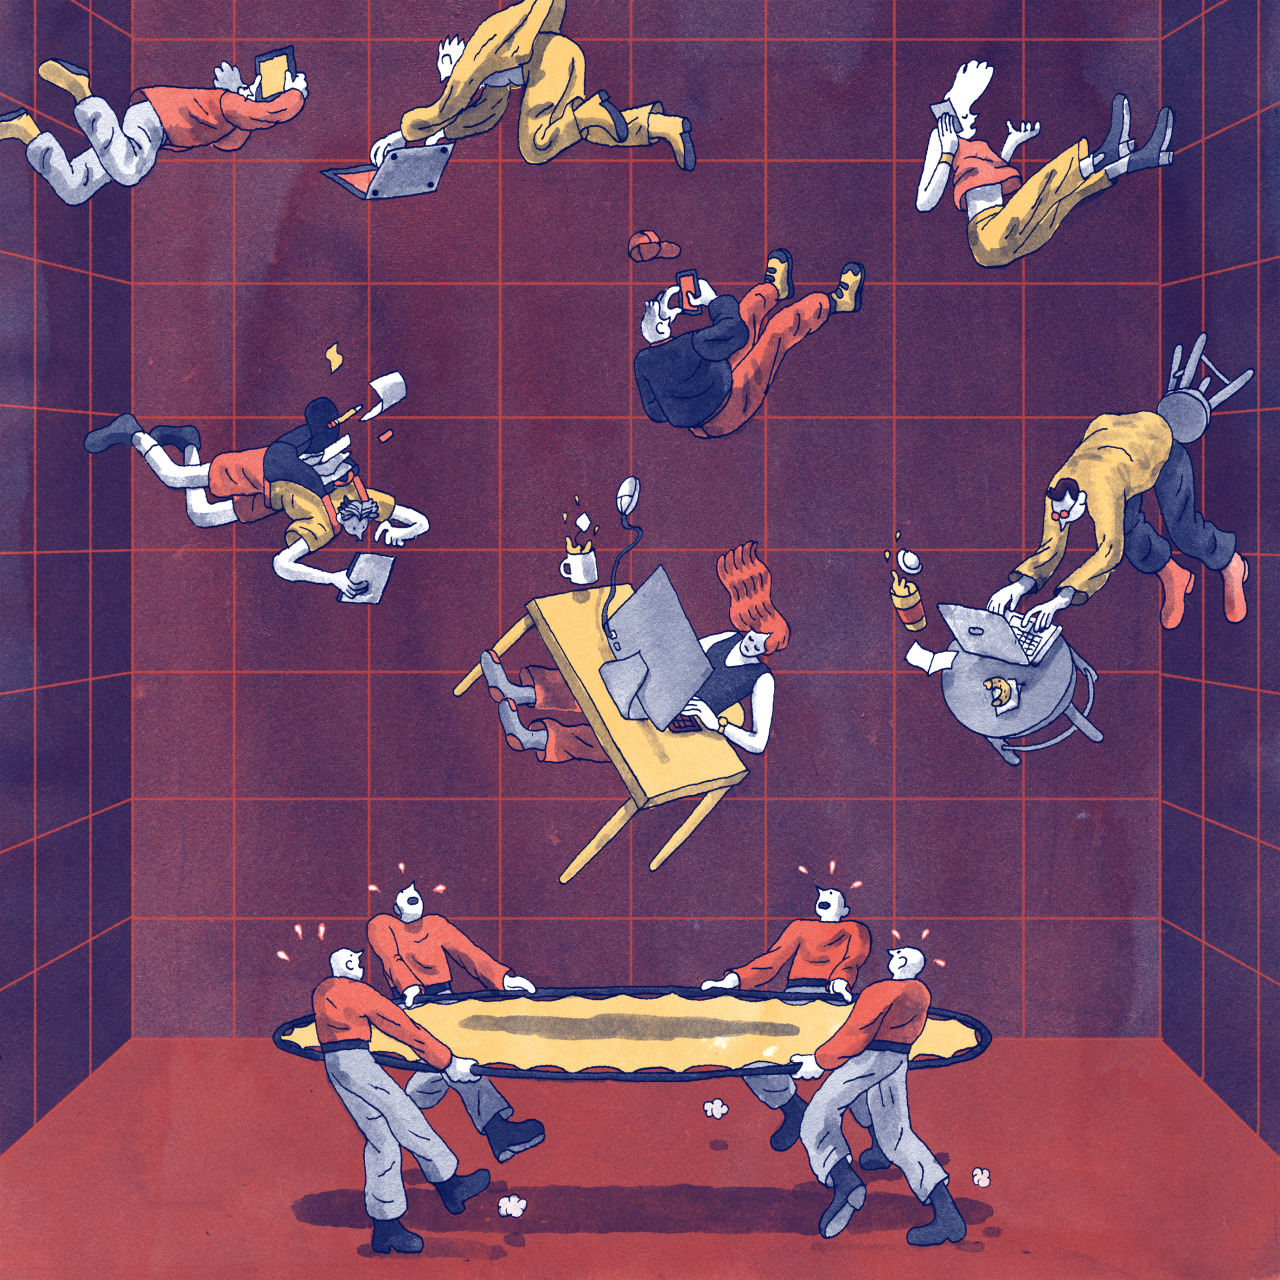 <b><a href="https://www.technologyreview.com/s/545736/can-we-insure-the-internet-of-things-against-cyber-risk/">Can We Insure the Internet of Things Against Cyber Risk?</a></b> <br> Illustration by Tim Peacock